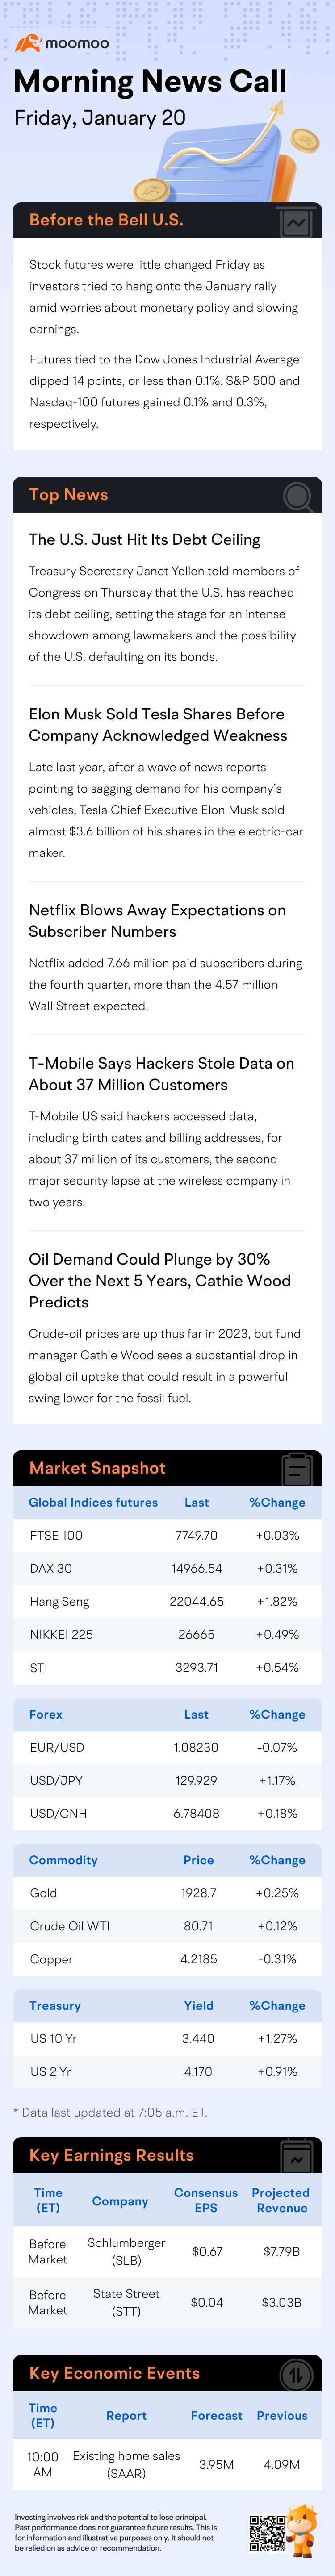 Before the Bell | Oil Demand Could Plunge by 30% Over the Next 5 Years, Cathie Wood Predicts